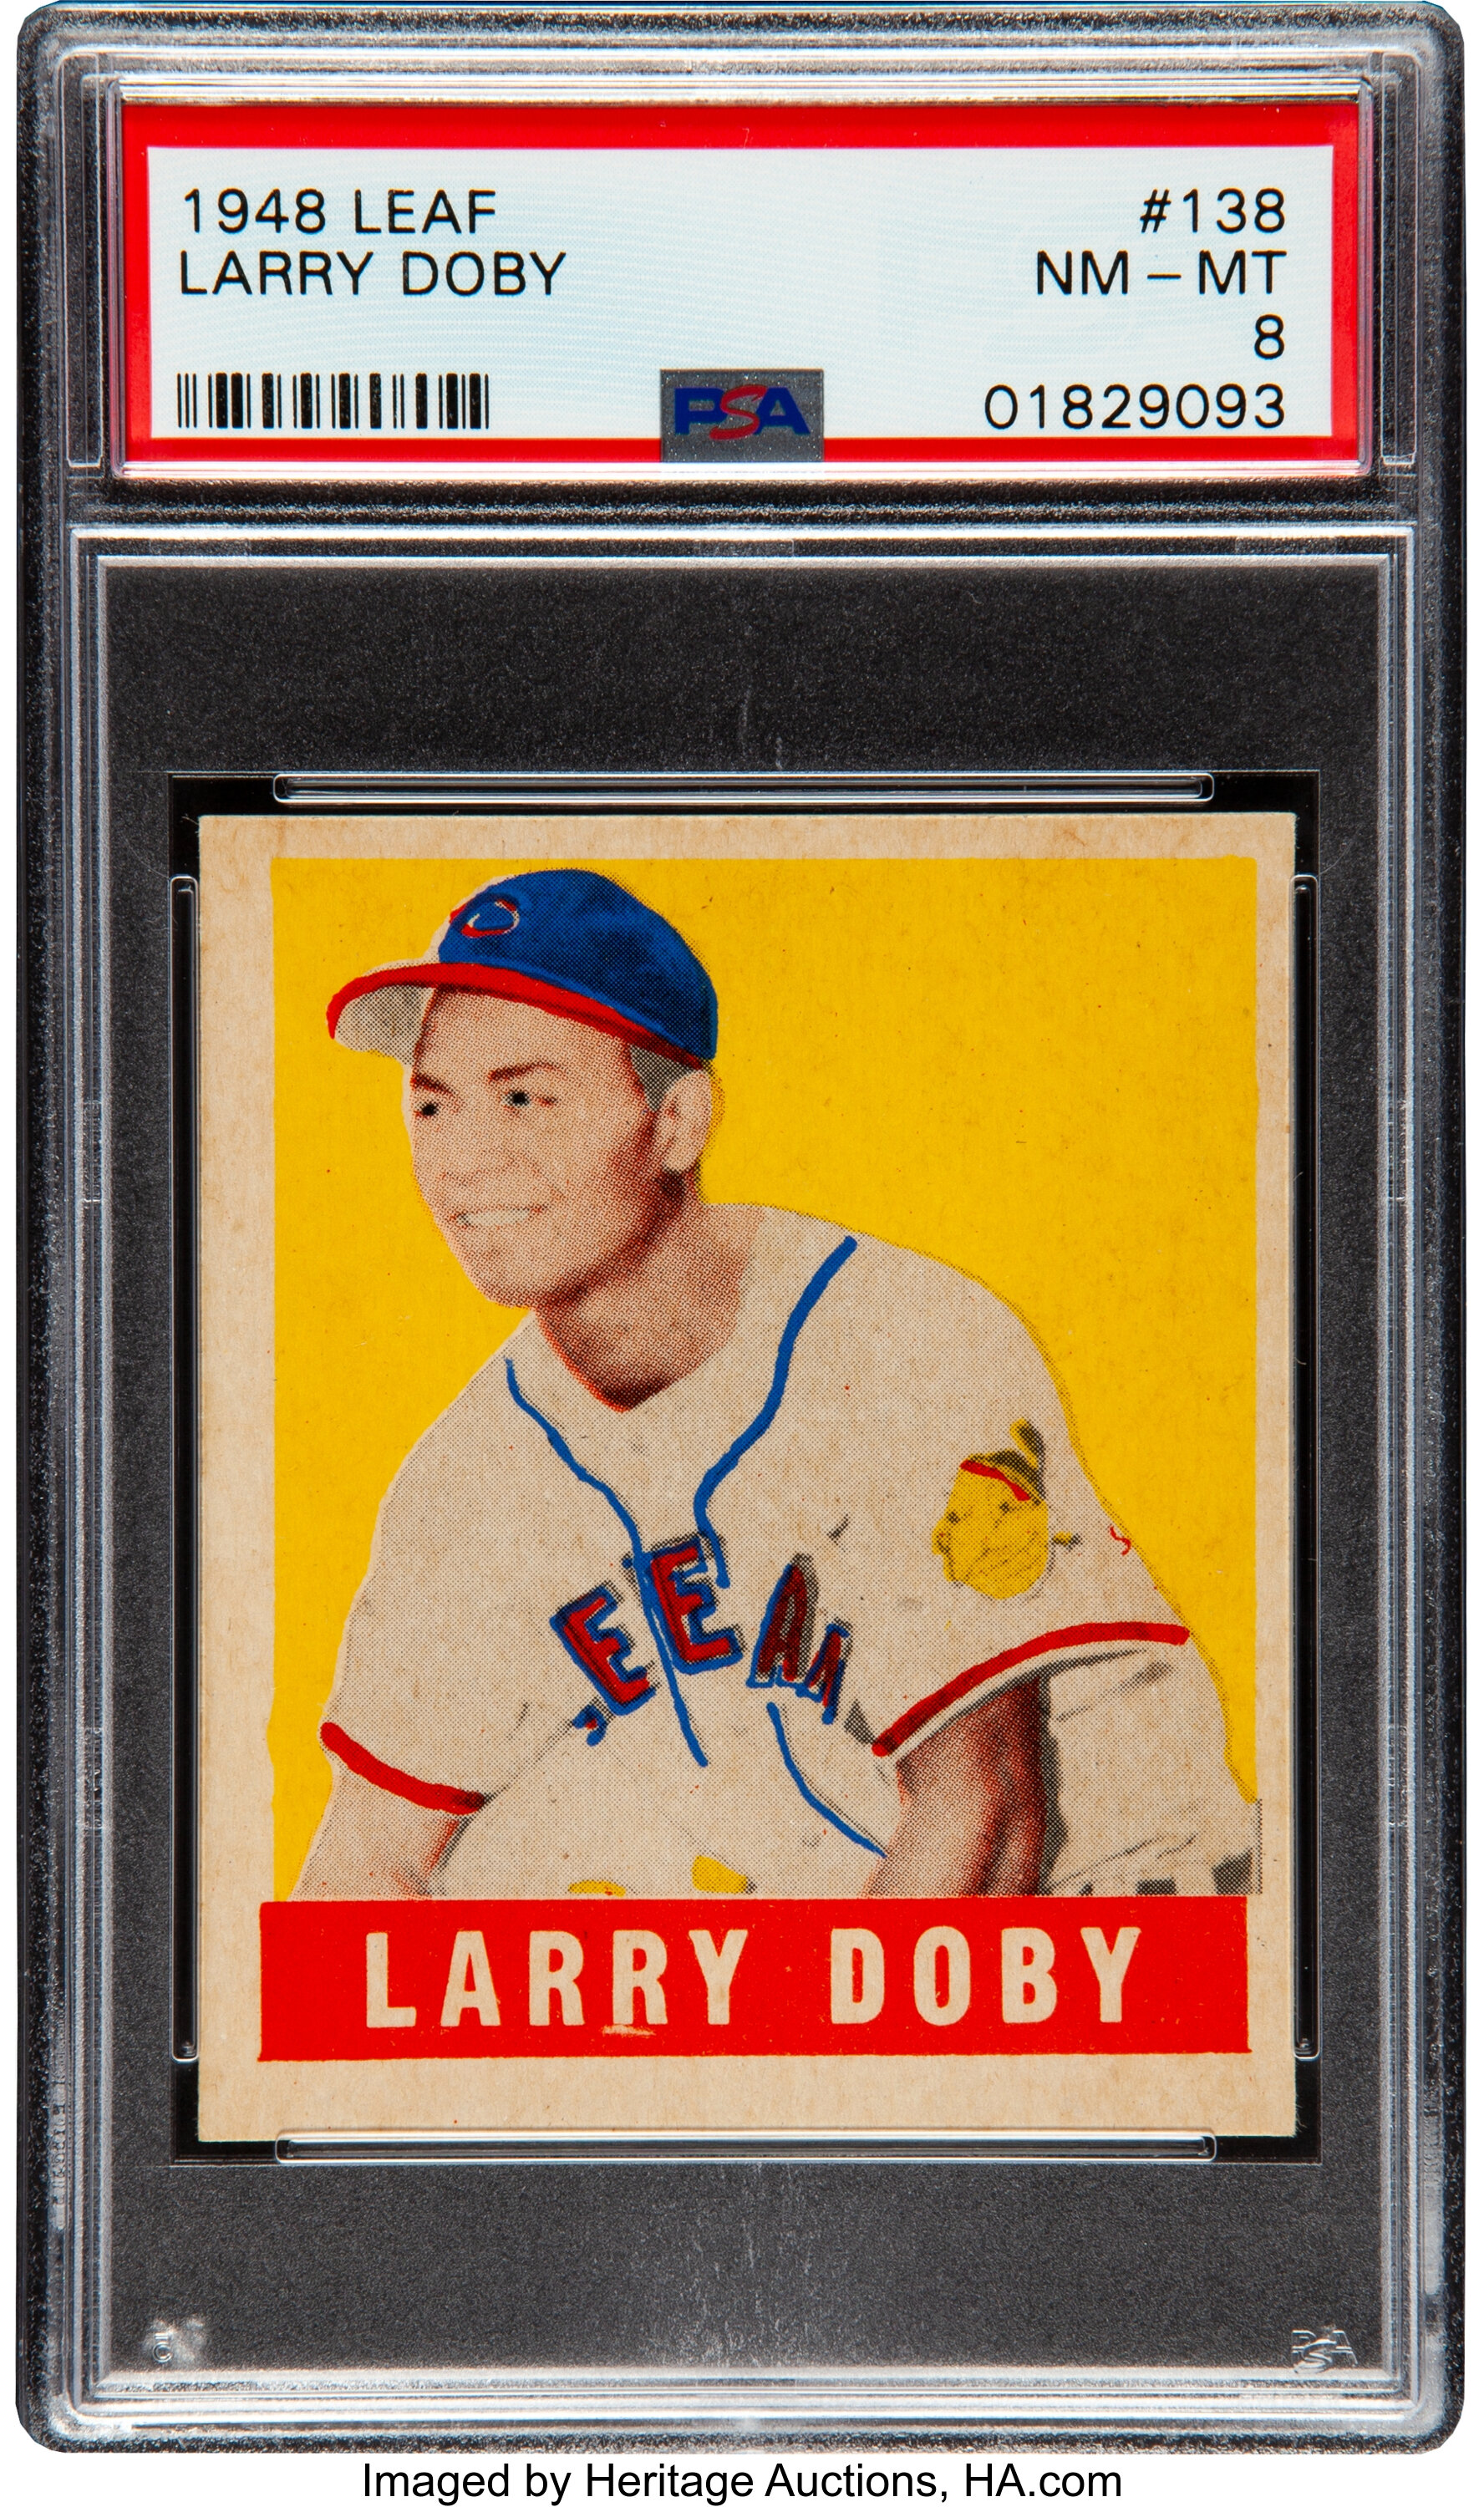 Sold at Auction: LARRY DOBY BASEBALL CARDS (7) - HIGH GRADE